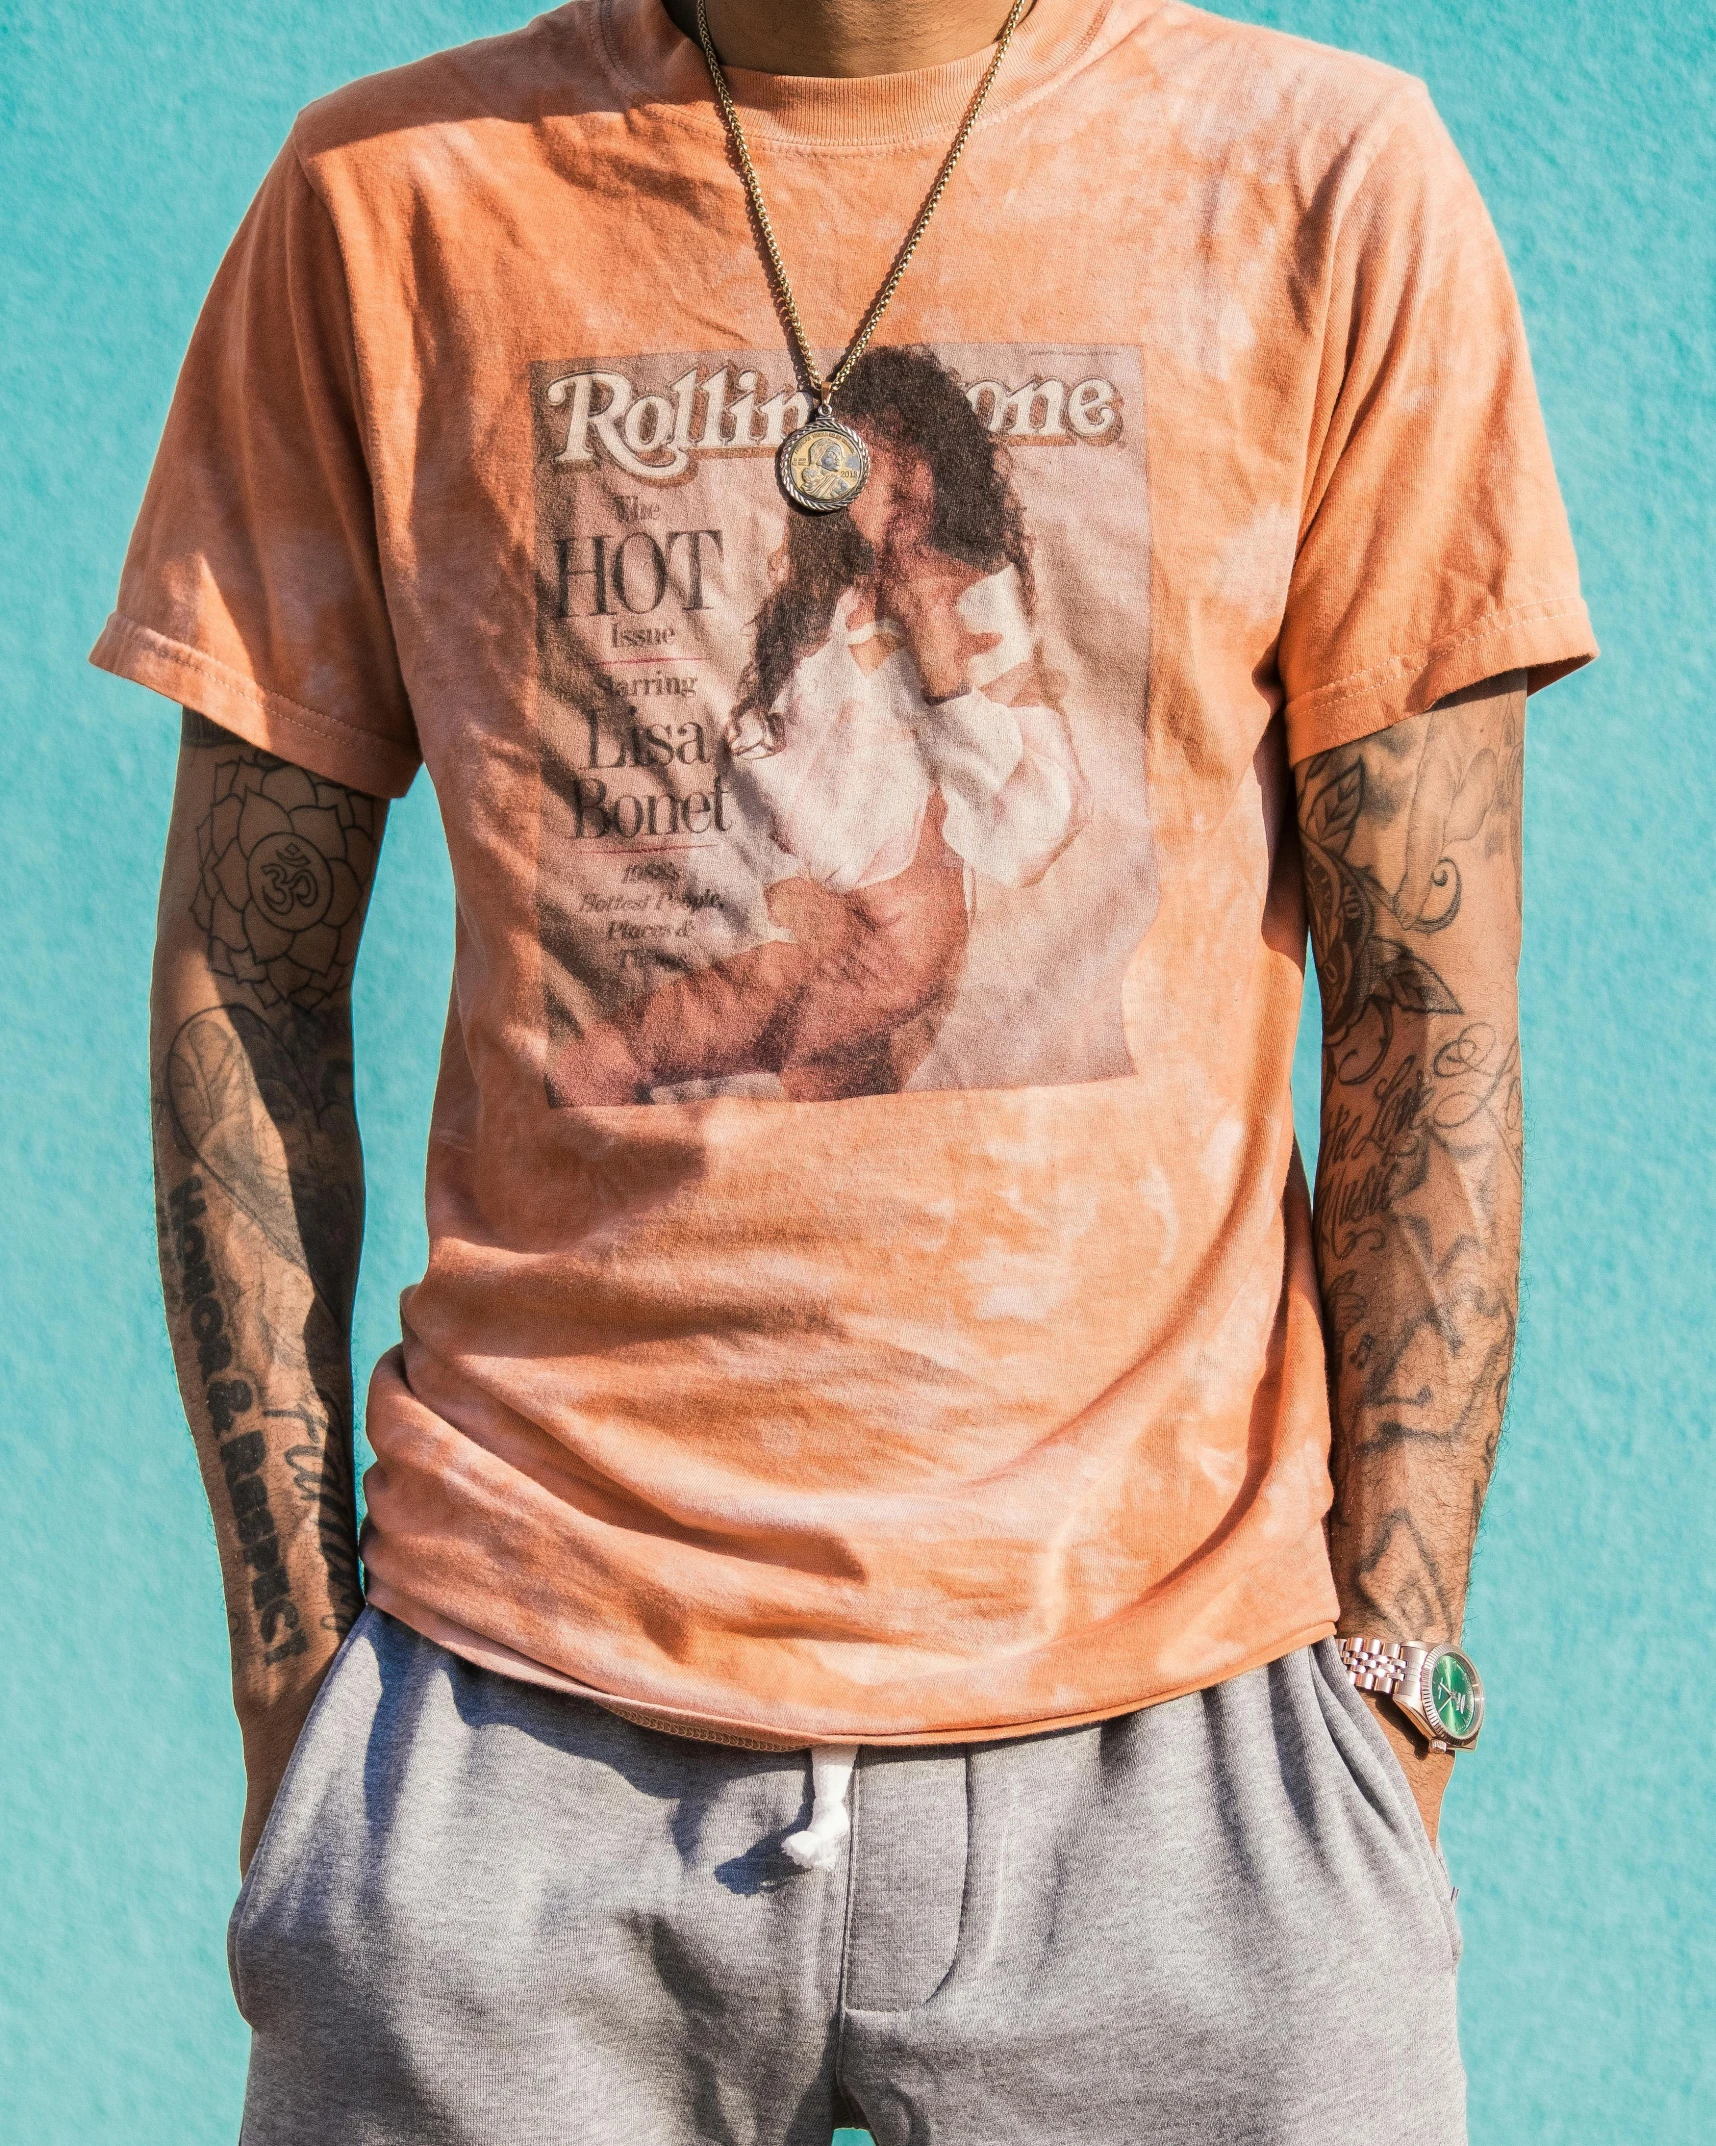 a man with a tattoo wearing shorts and an orange shirt